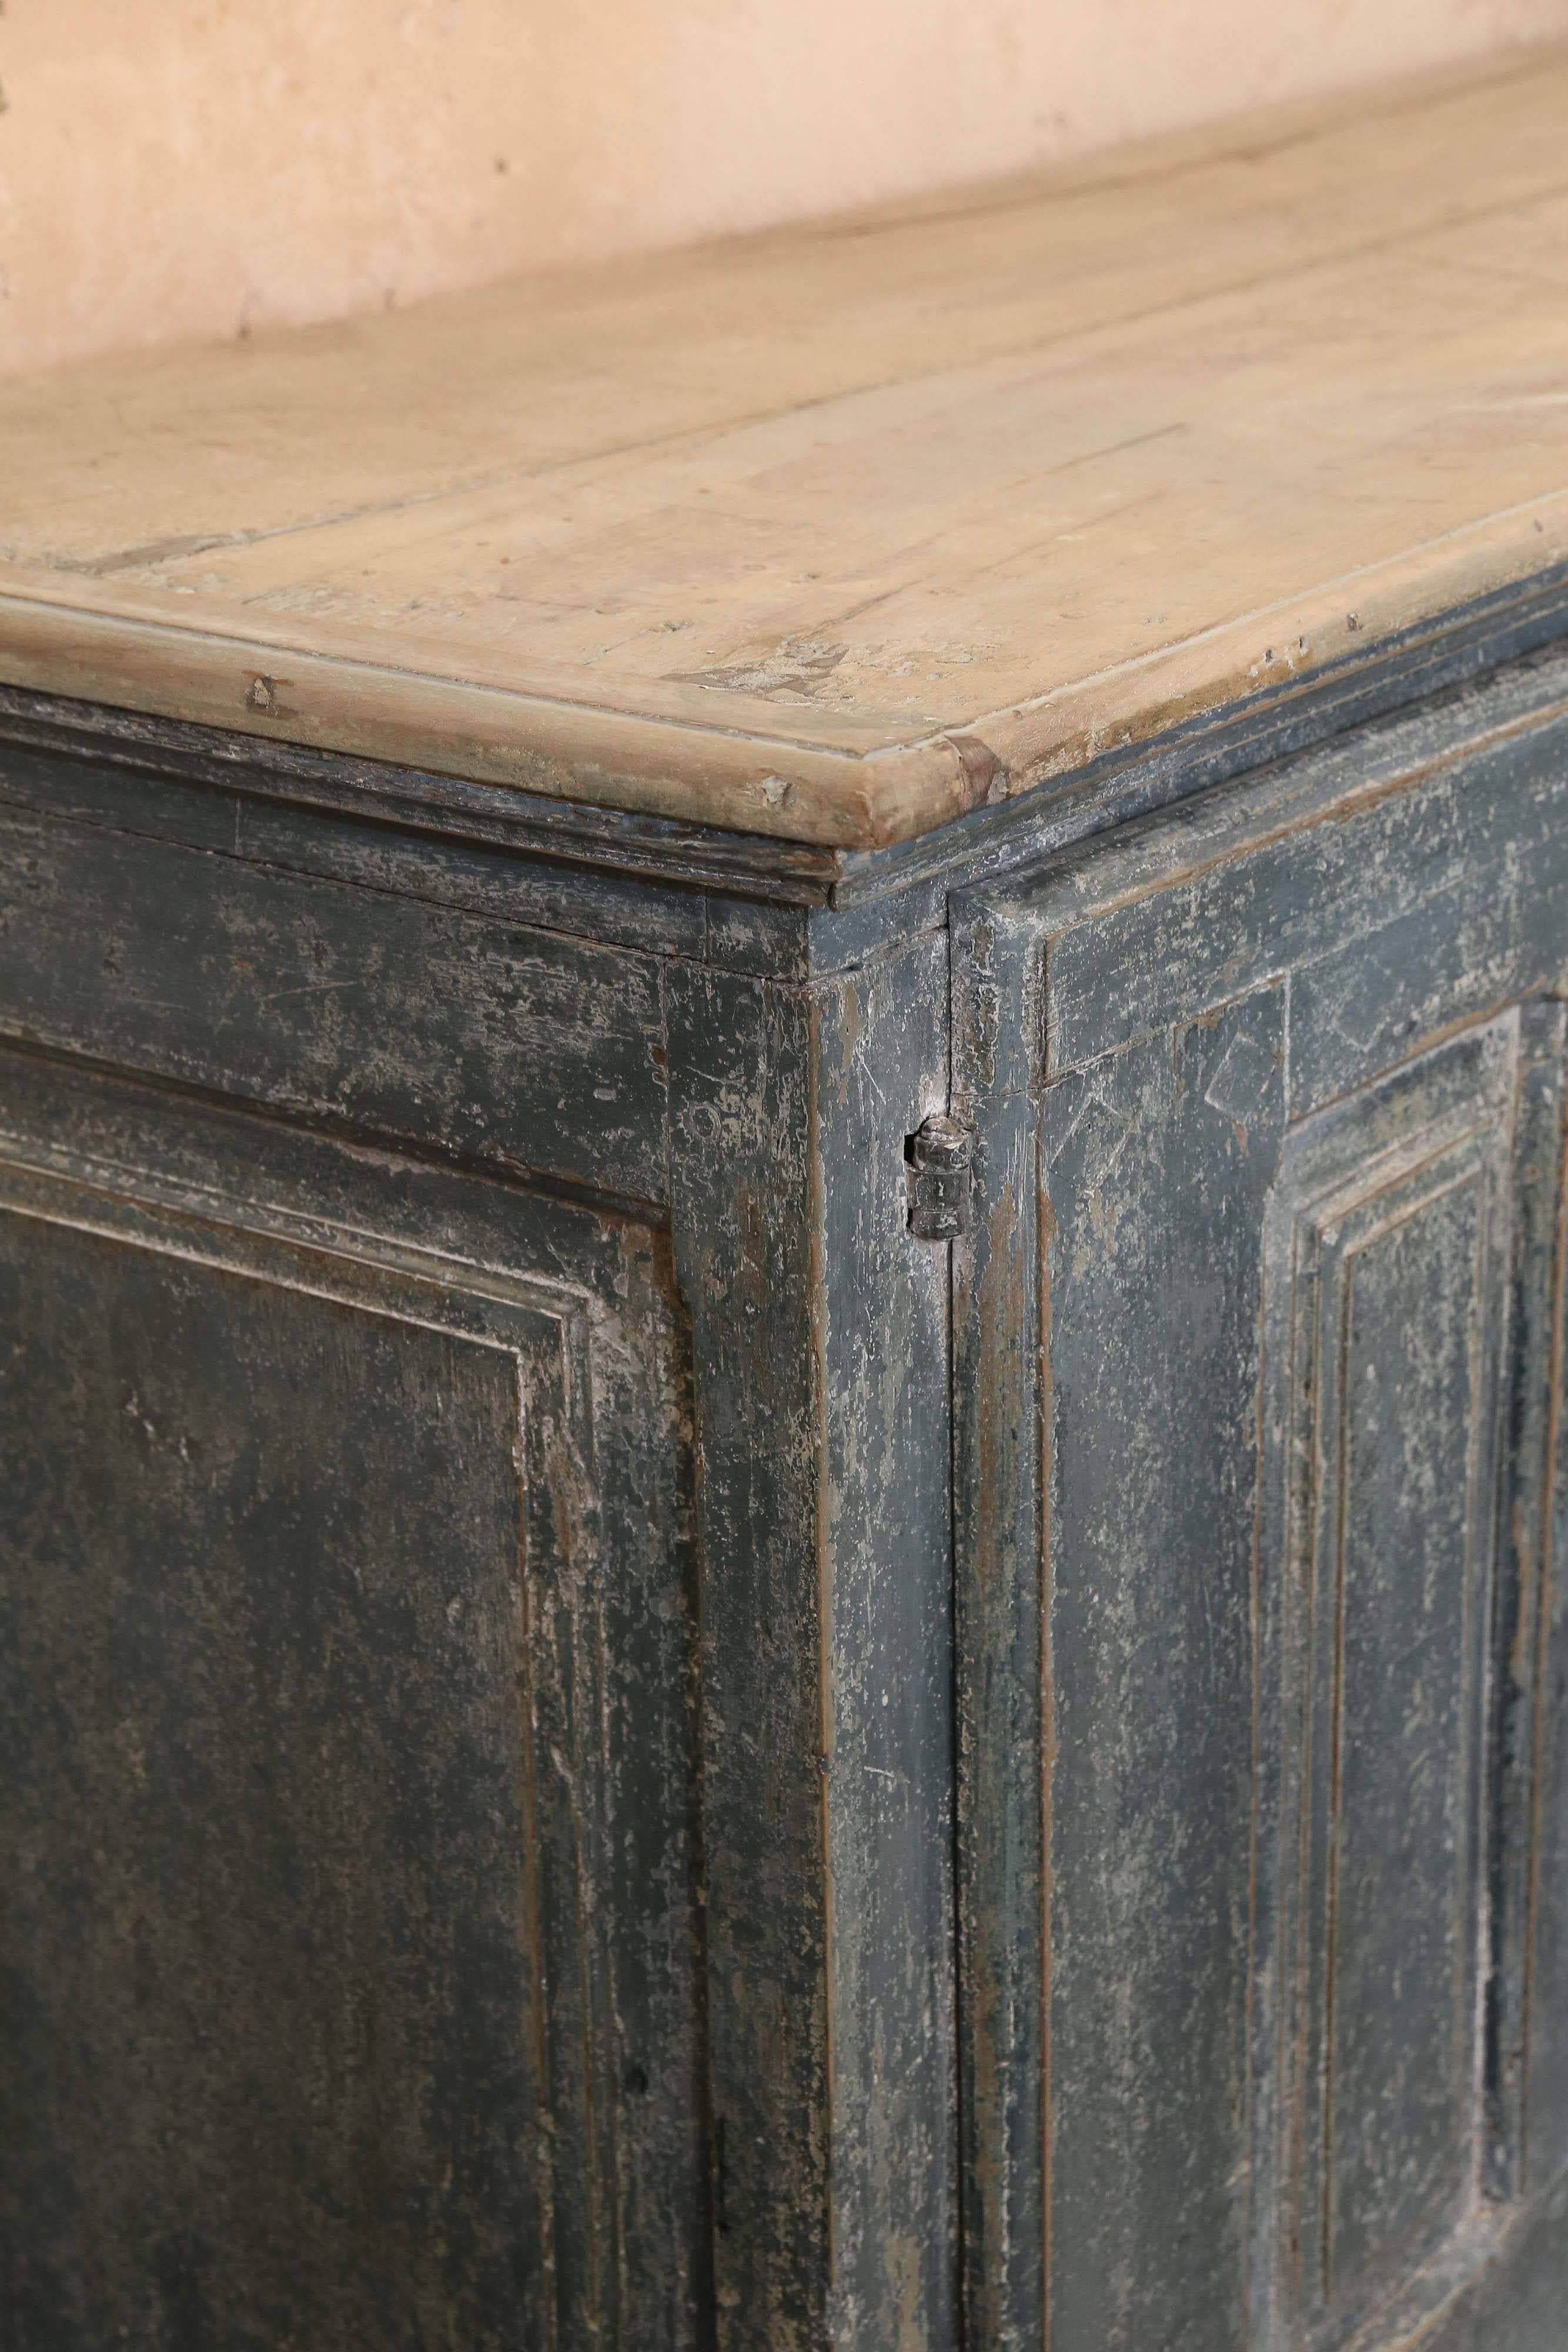 Large painted two-door cabinet. Stripped finish on top with heavy original hardware on the doors. Great proportions and patina.